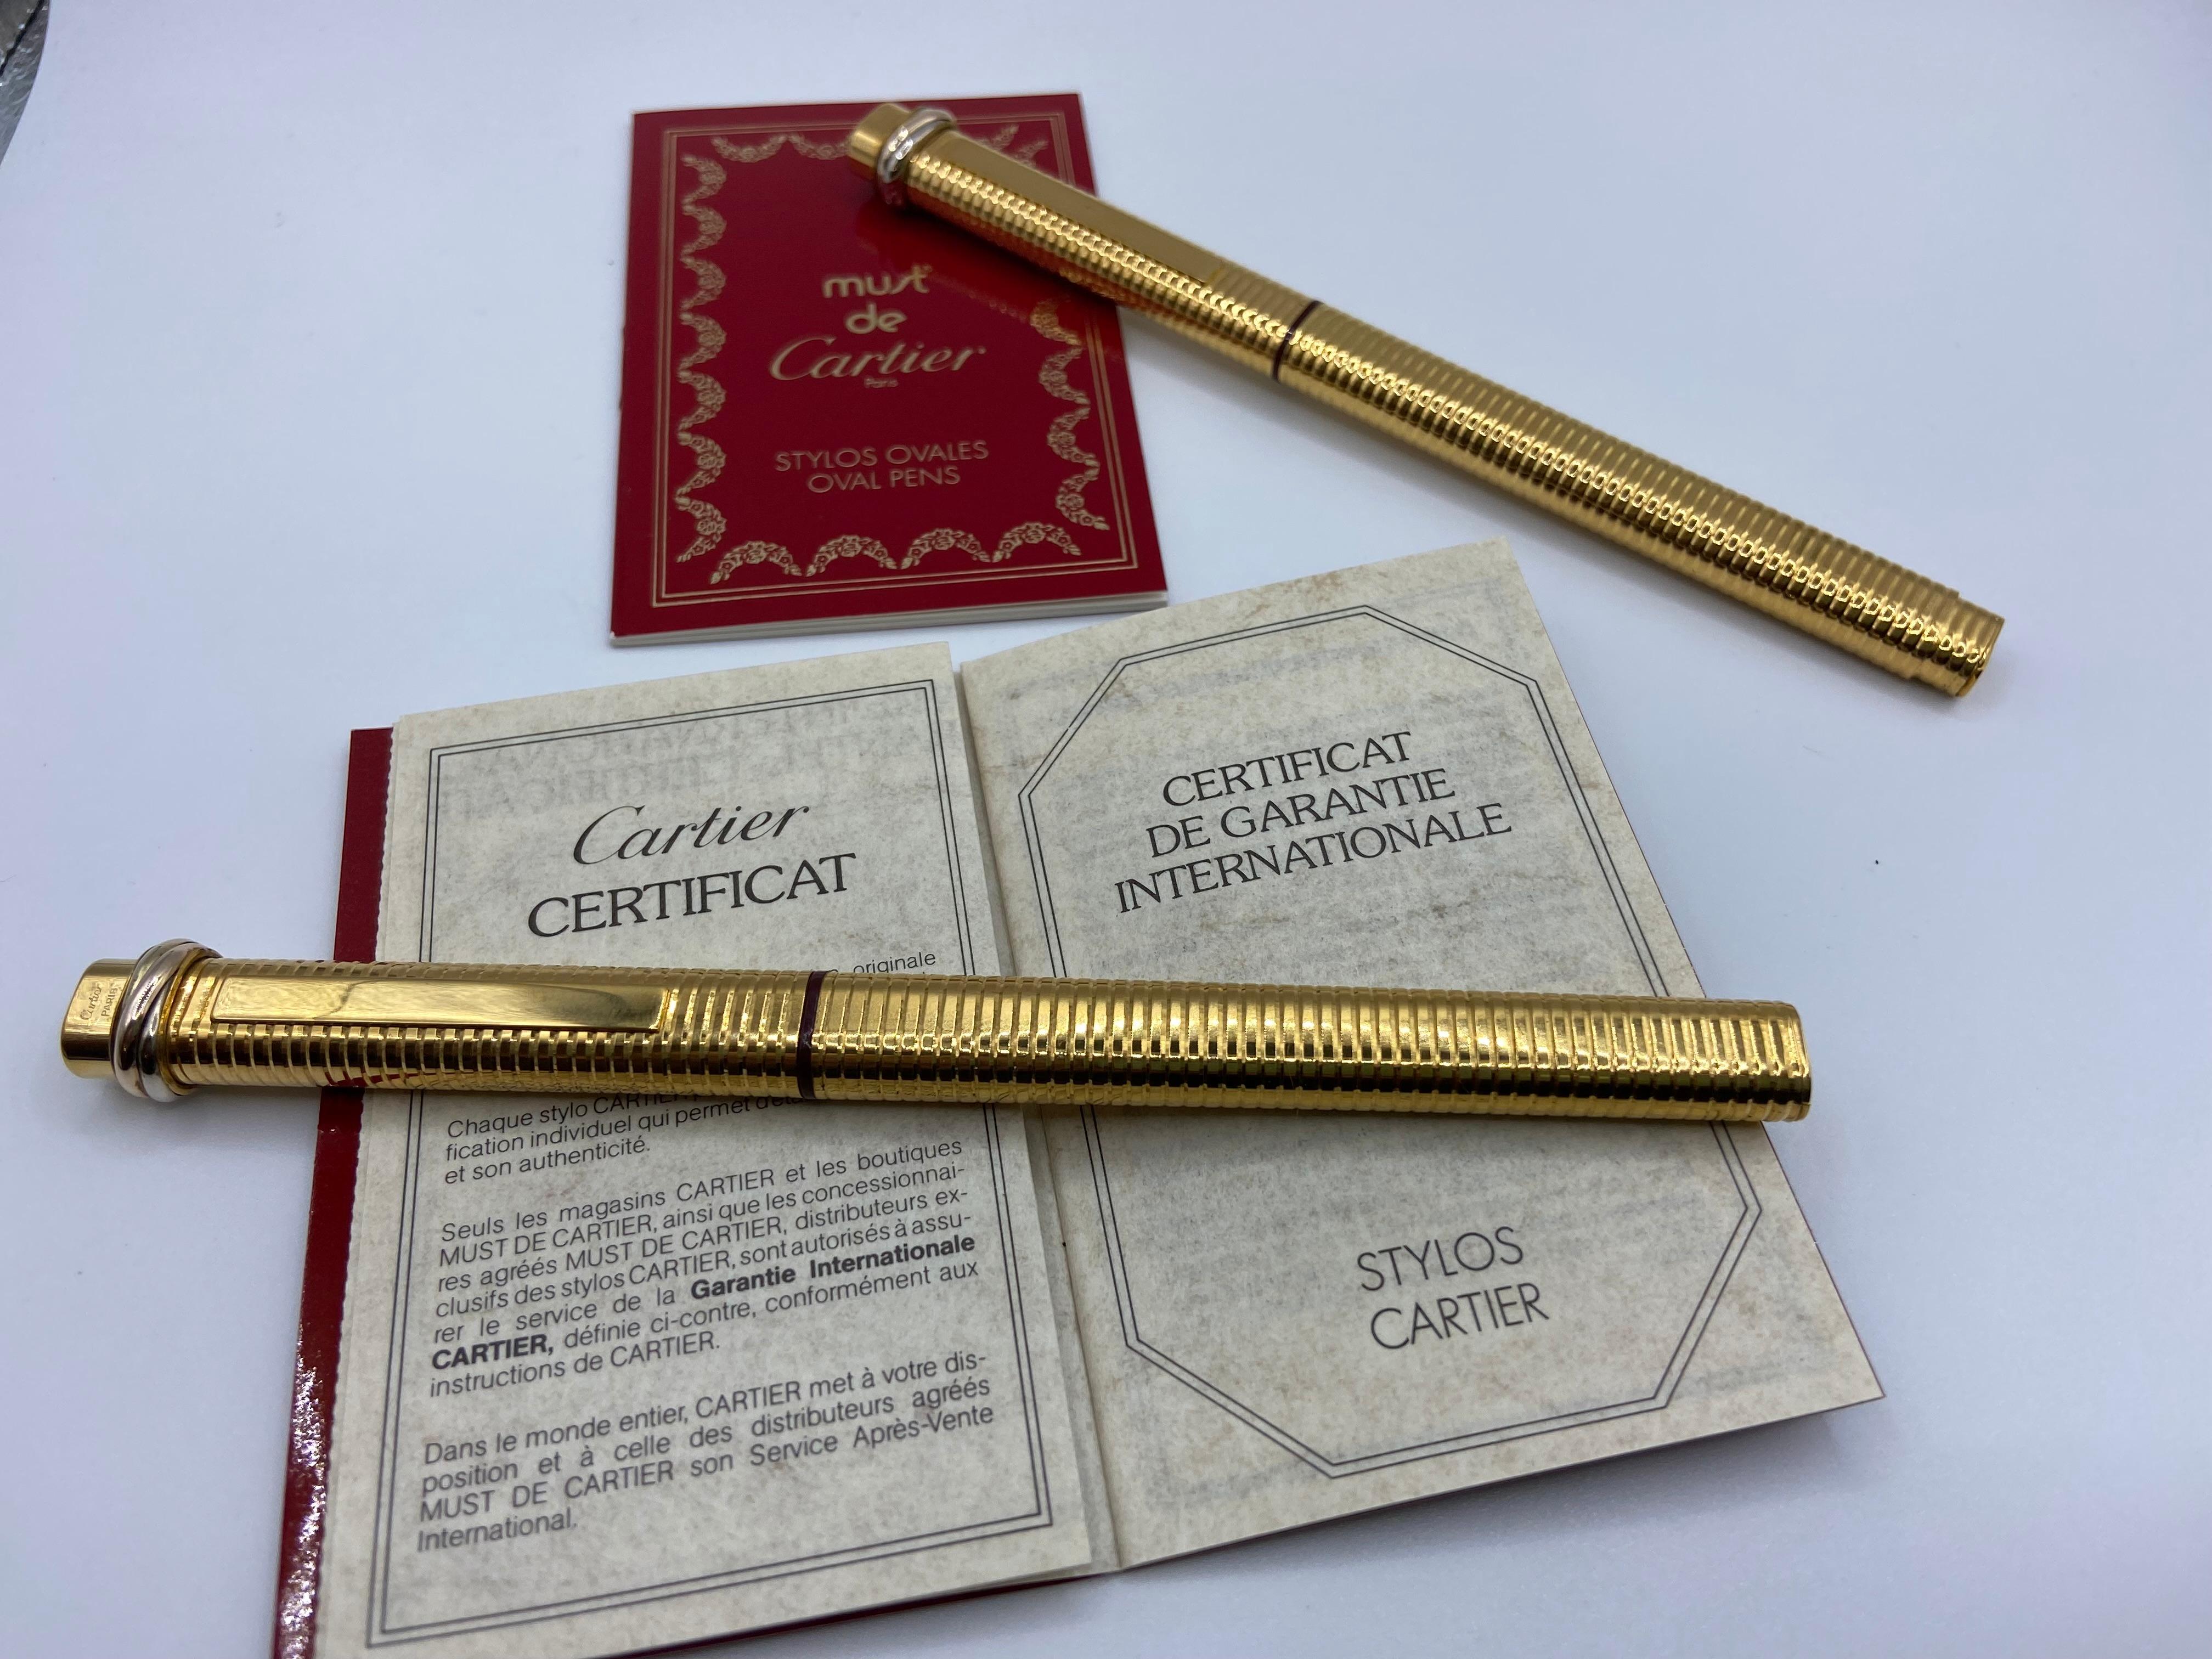 Two Pens, a Fountain Pen and a Roller, Santos by Must de Cartier, 18 Kt Gold Plated 4